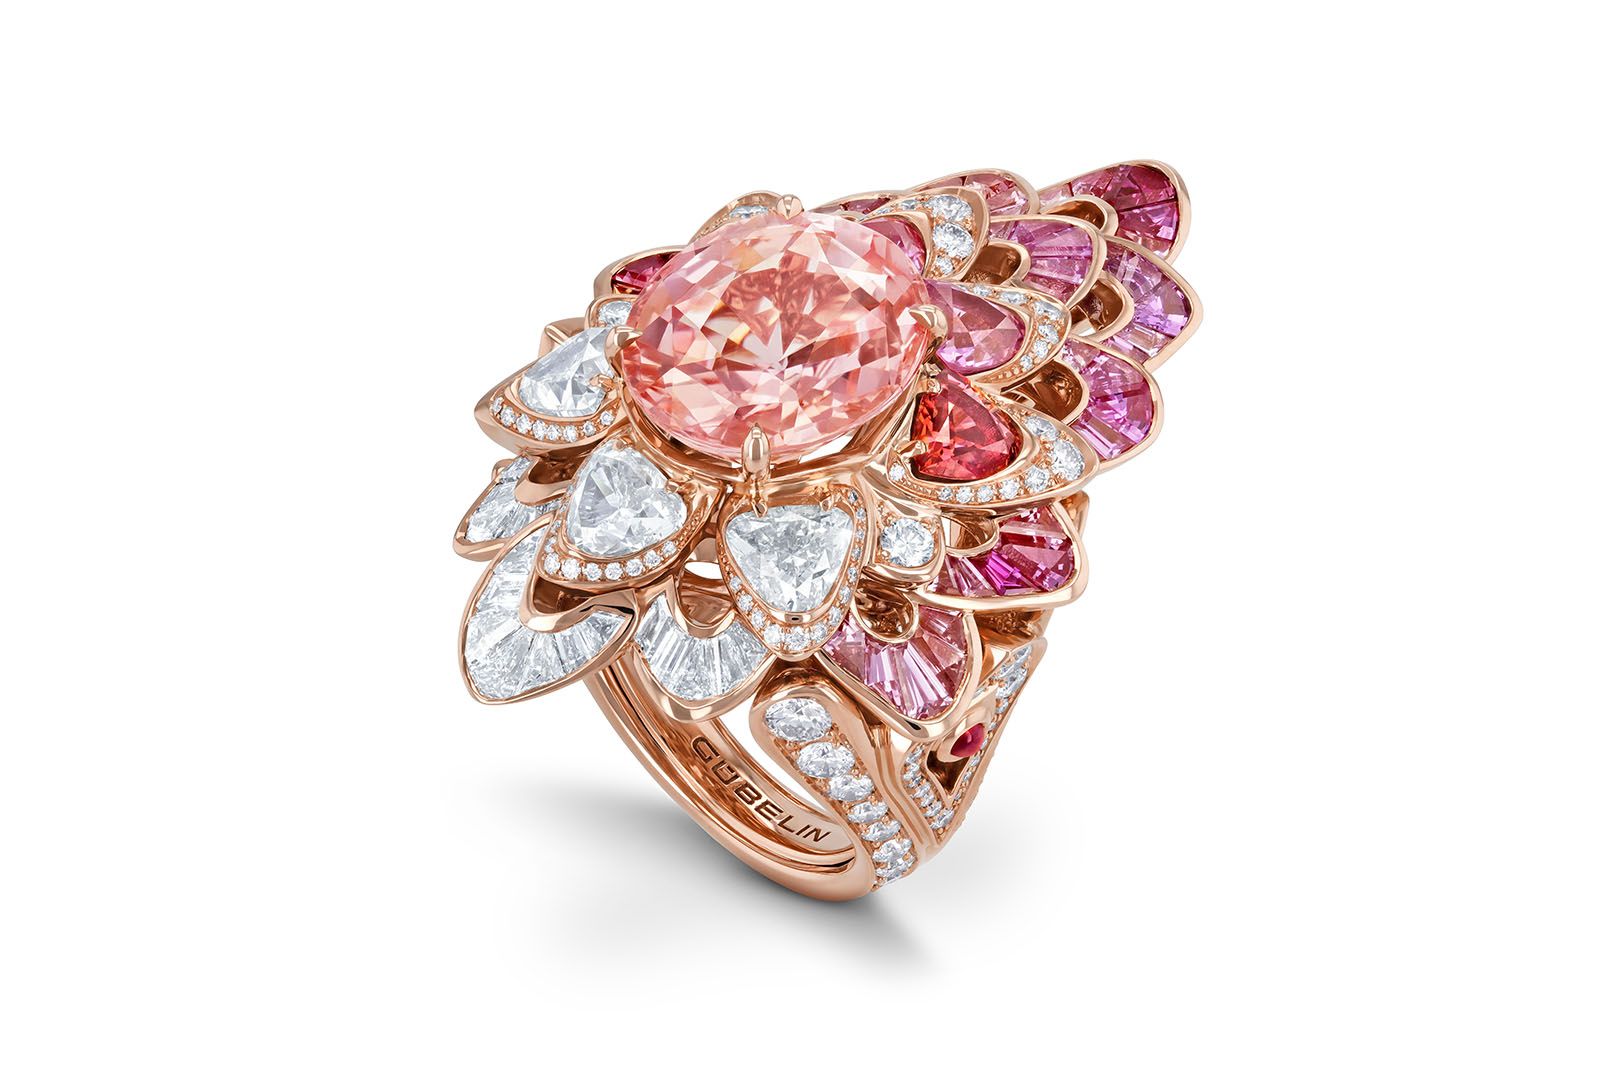 Gübelin Jewellery Flaming Grace cocktail ring with an oval-shaped Padparadscha sapphire from Sri Lanka